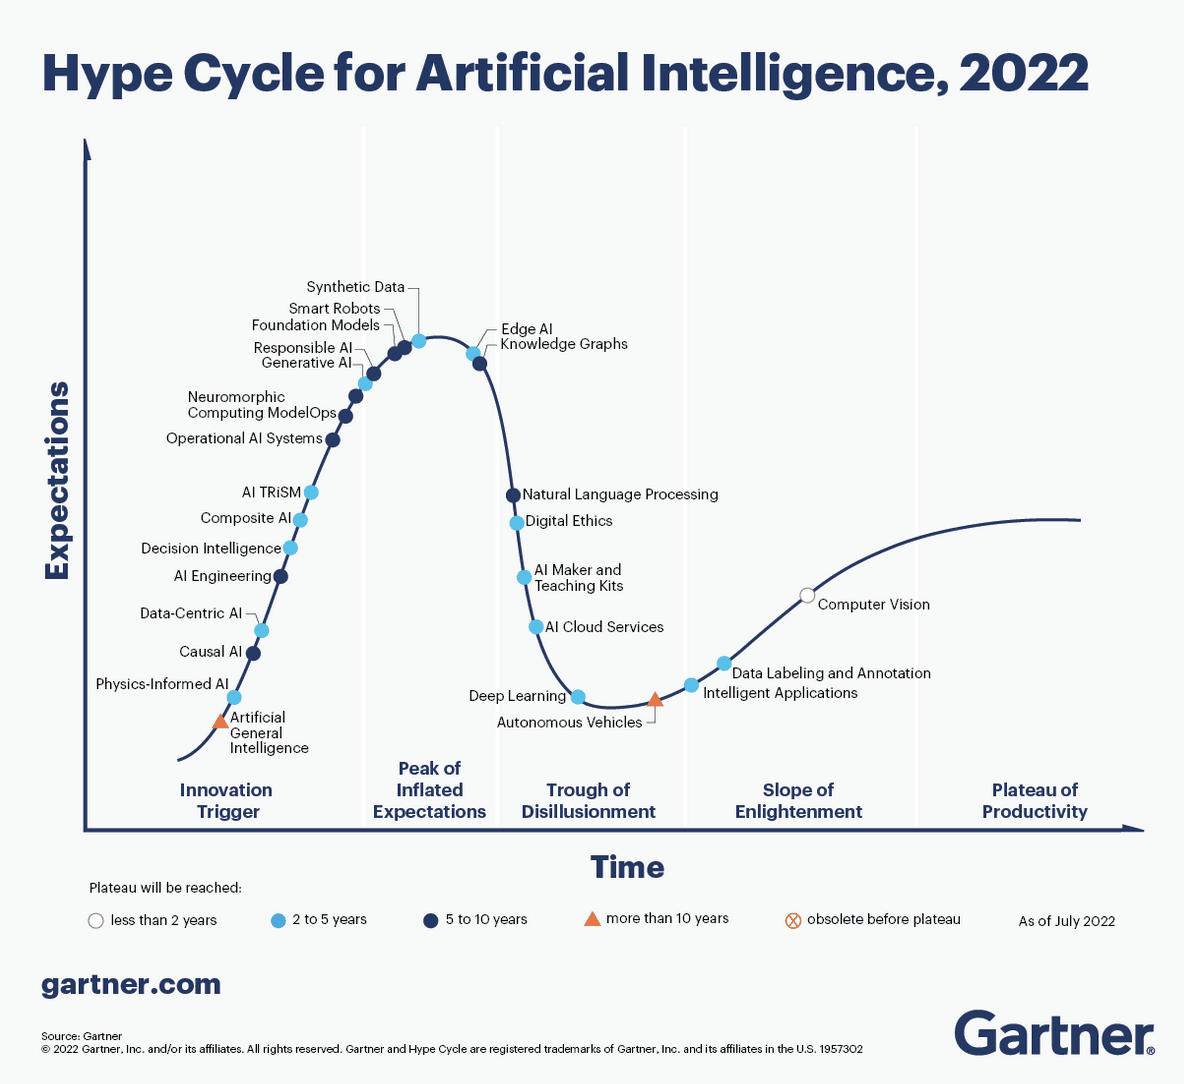 Image source: Gartner. Hype Cycle for Artificial Intelligence 2022 KellyOnTech